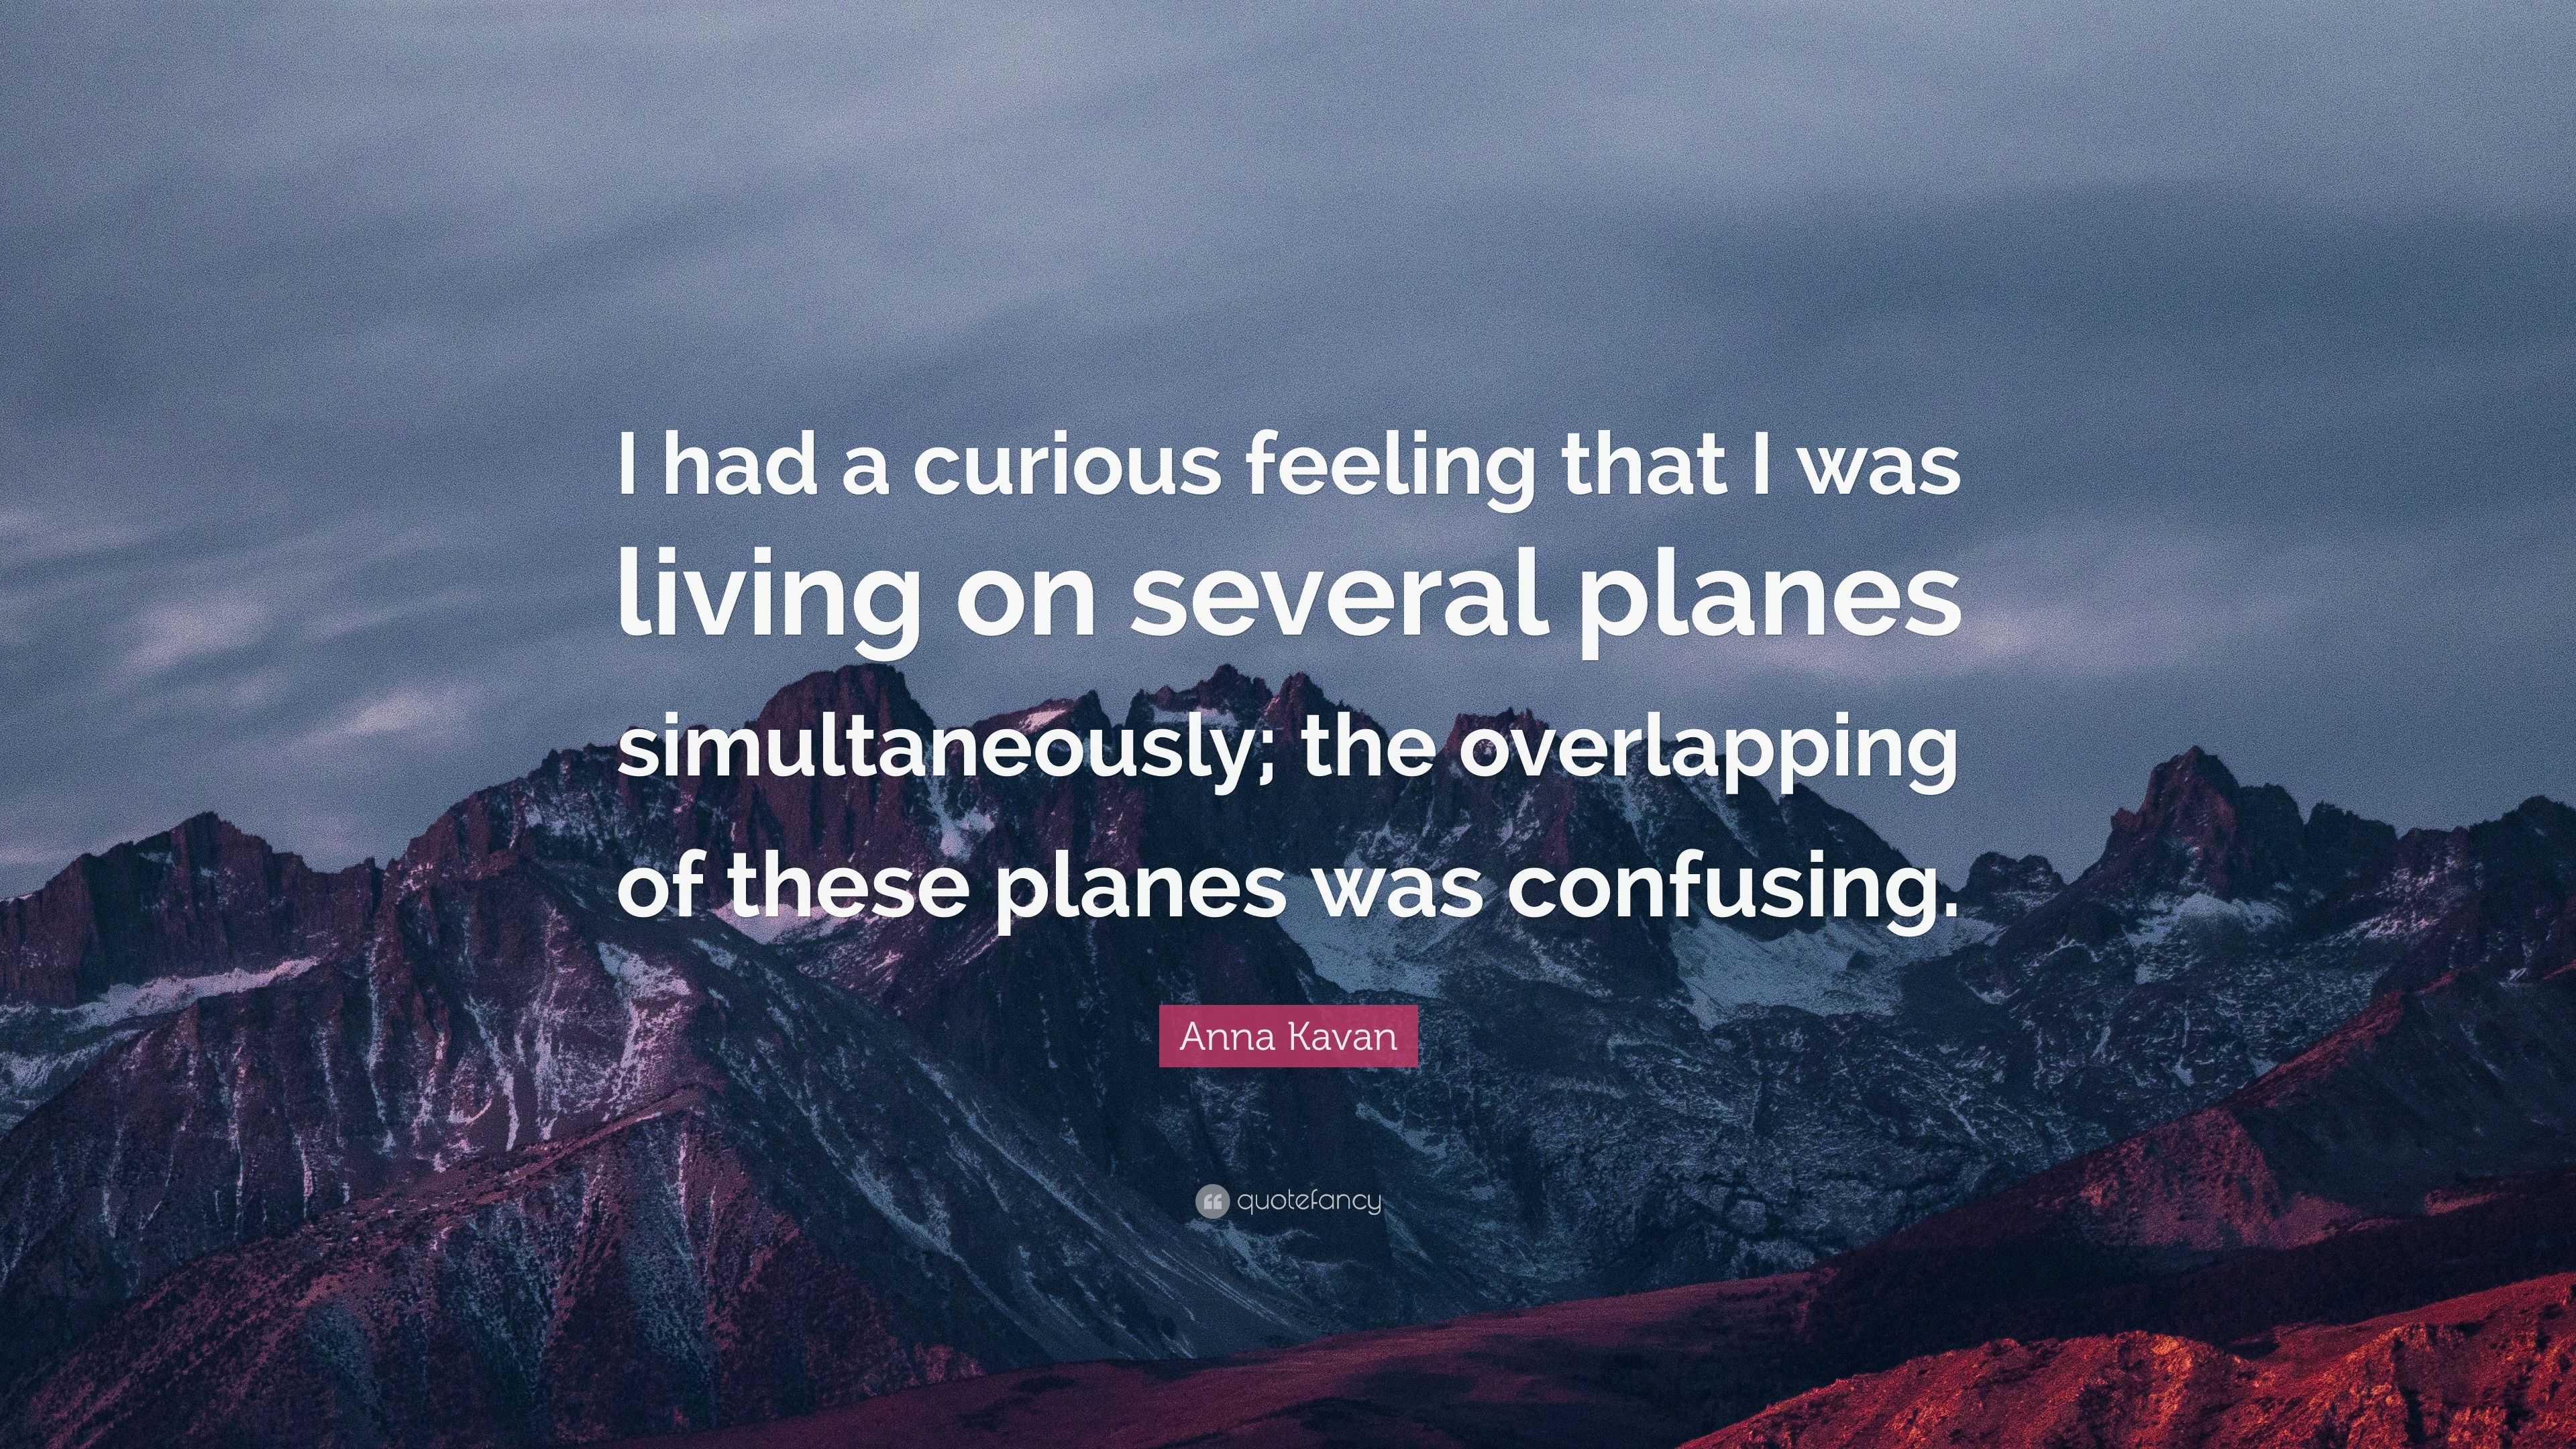 Anna Kavan Quote: “I had a curious feeling that I was living on several ...